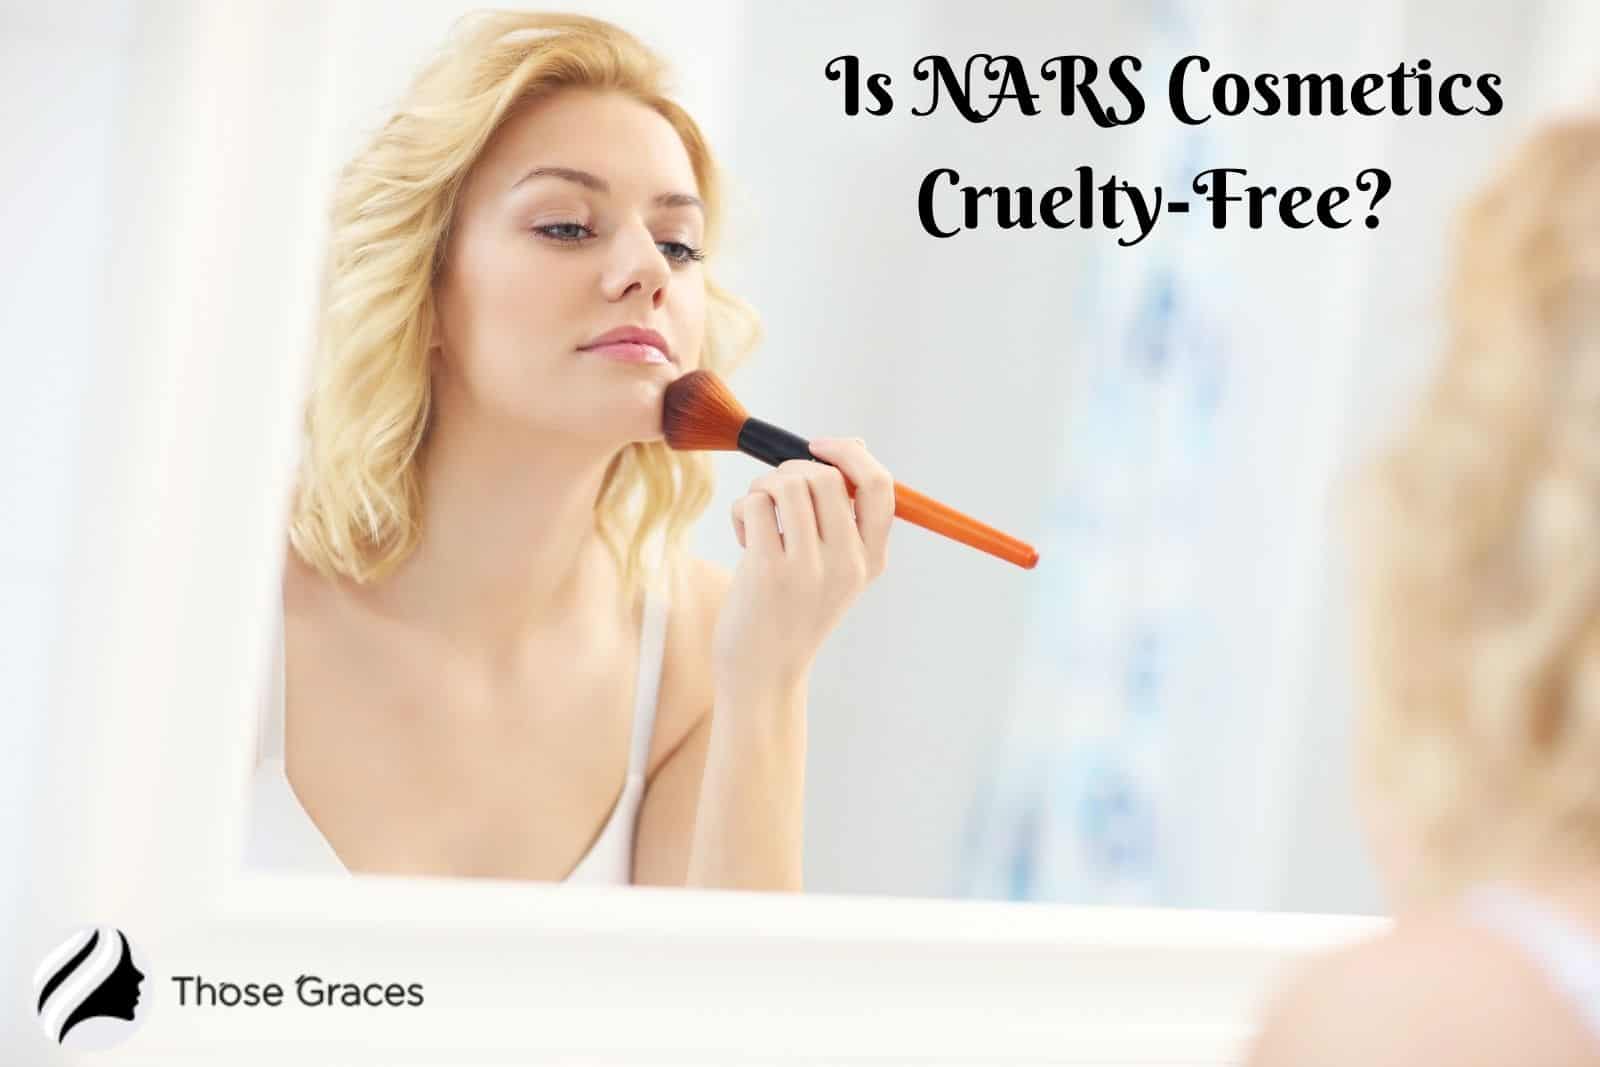 is nars cruelty free? a lady putting nars cosmetics on her face